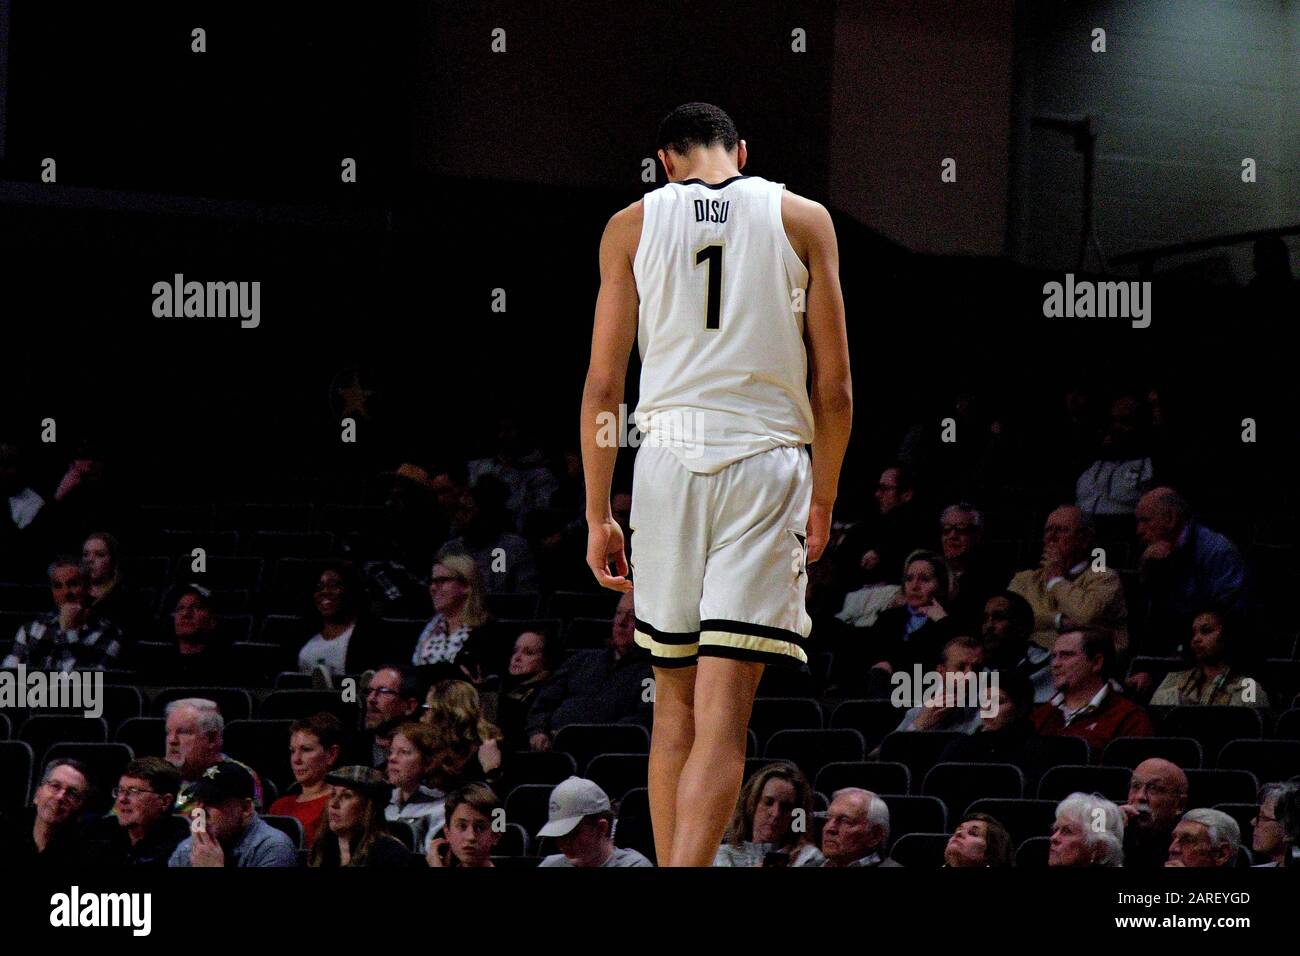 Vanderbilt Commodores forward Dylan Disu (1) reacts during the second half of an NCAA SEC basketball game against the Alabama Crimson Tide at Memorial Gym. Alabama won 77-62. Wednesday, Jan 22, 2020, in Nashville. Alabama defeated Vanderbilt 77-62. (Photo by IOS/ESPA-Images) Stock Photo